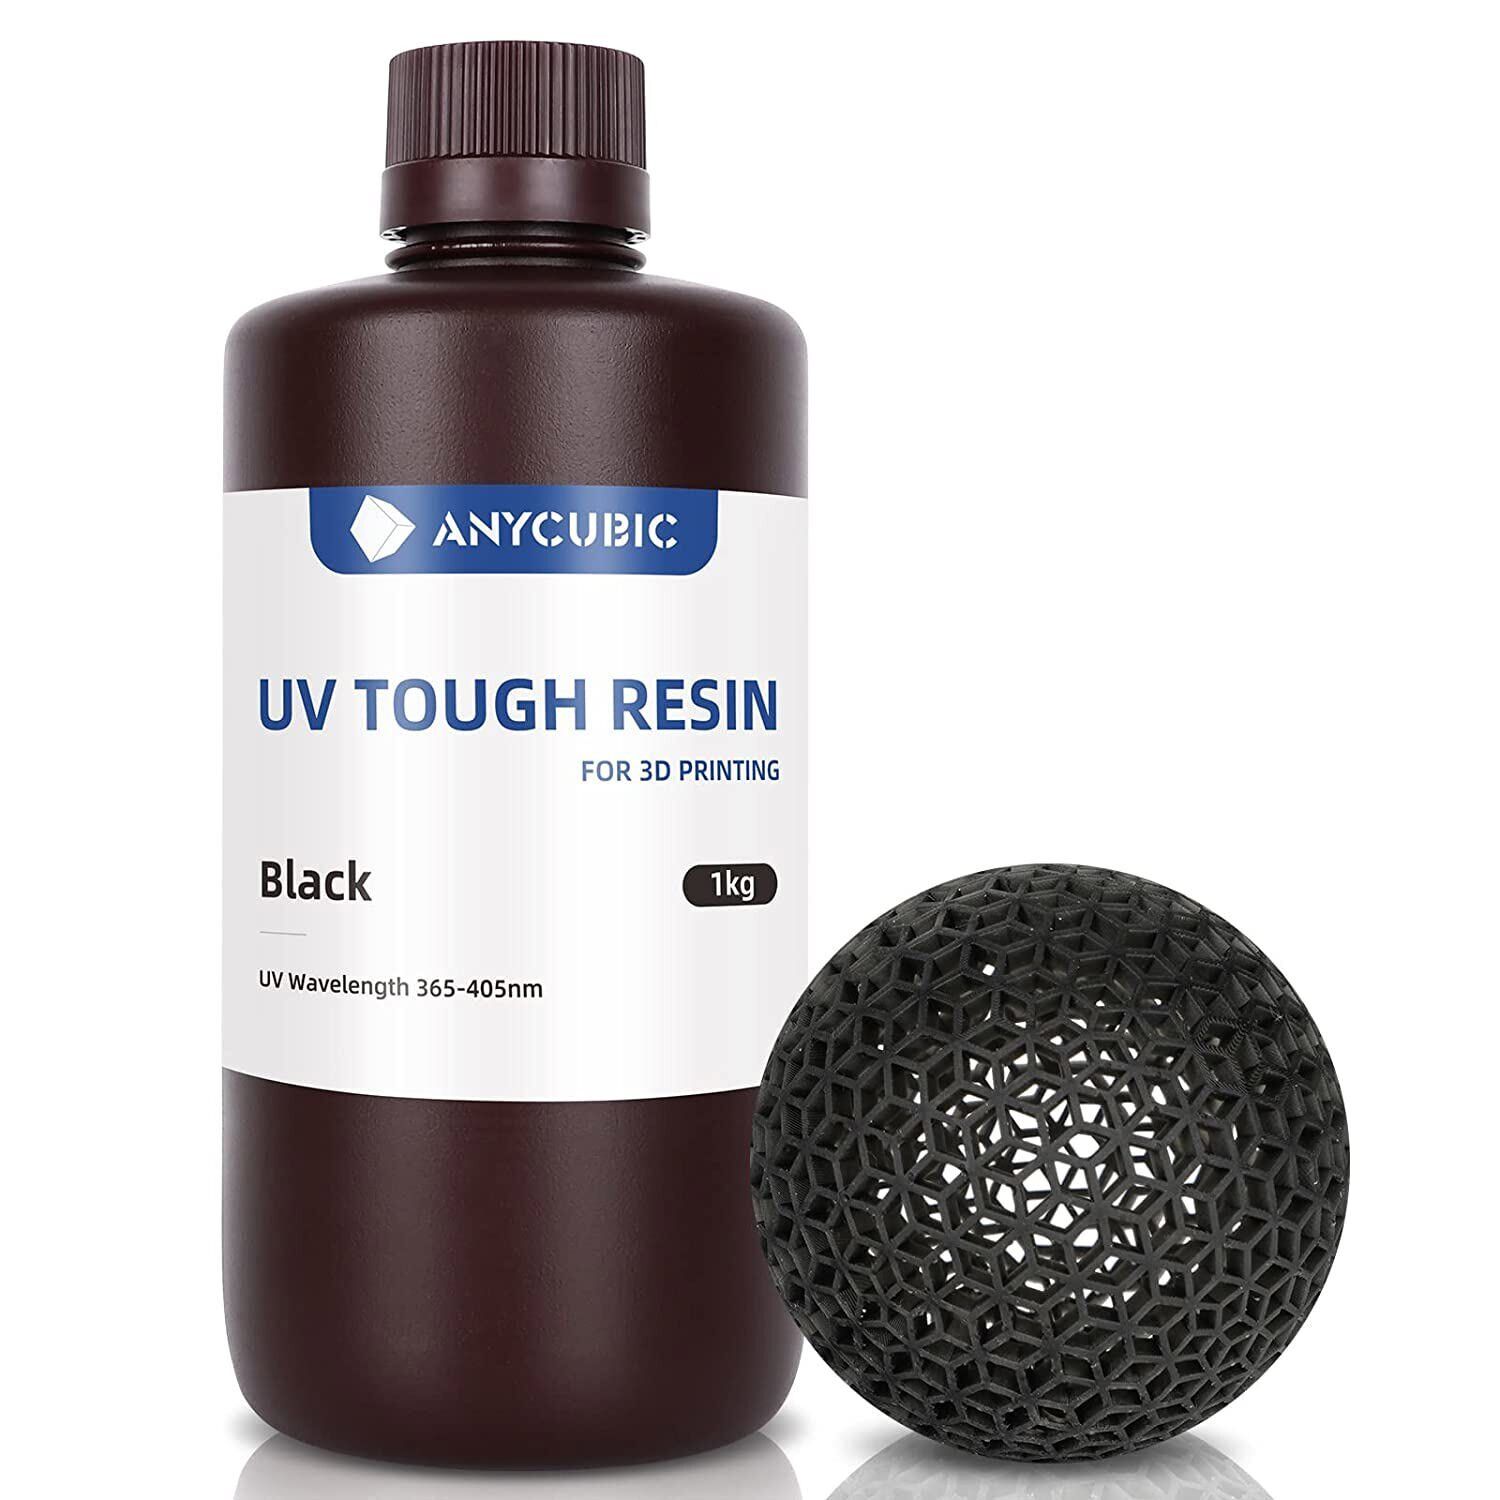 【Buy 5 Pay 3】ANYCUBIC 1KG UV Tough Resin Flexible Resin For LCD 3D Printing